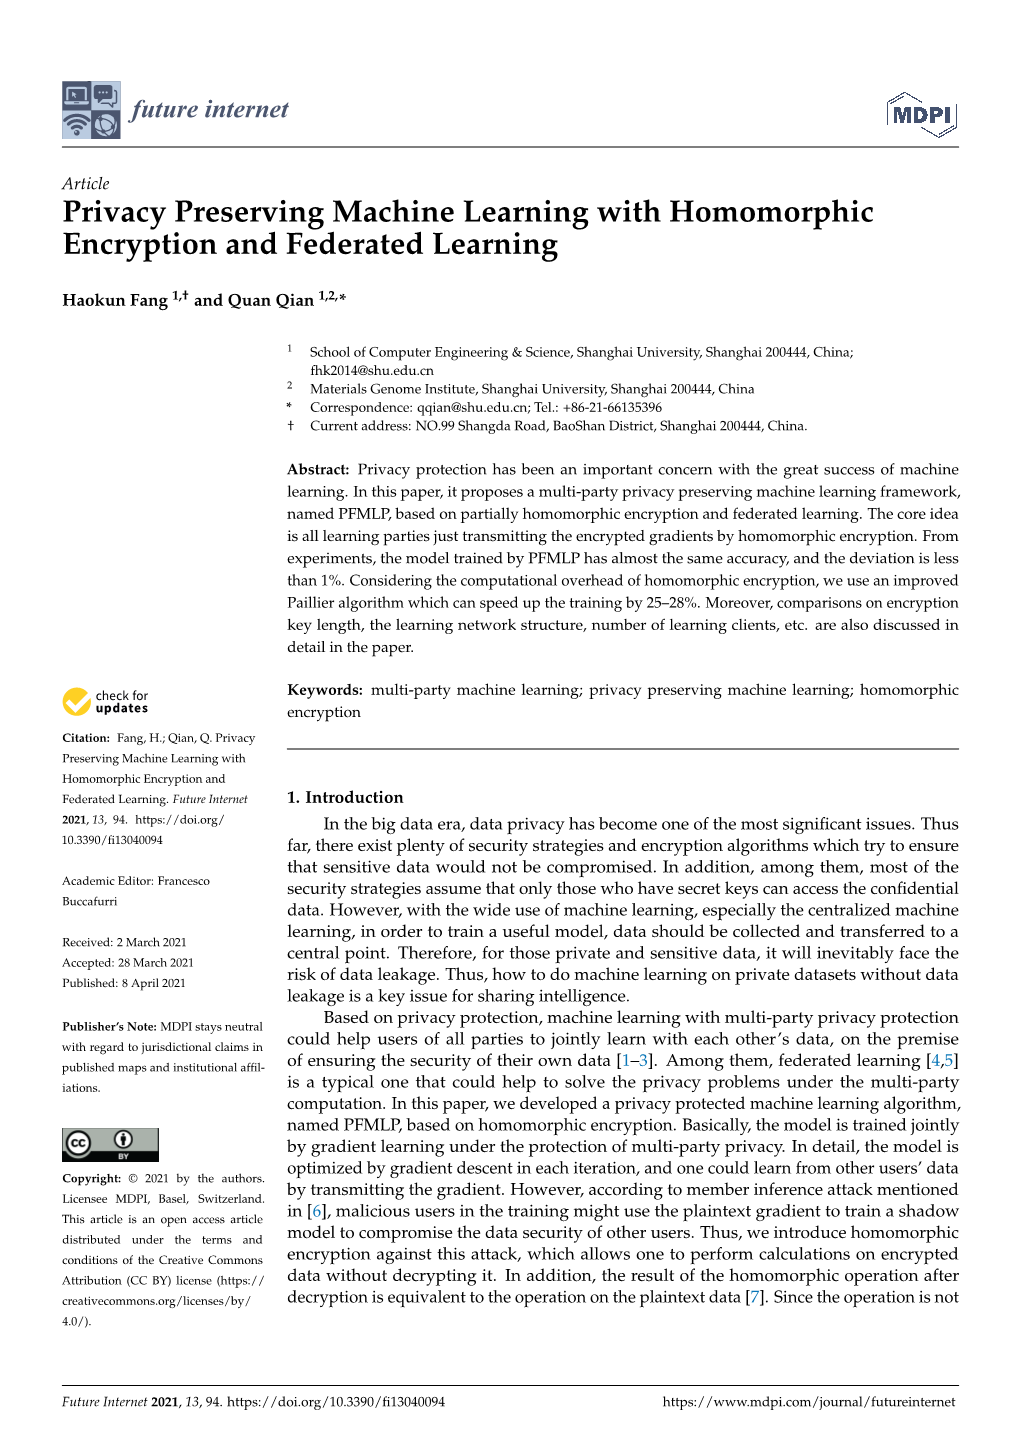 Privacy Preserving Machine Learning with Homomorphic Encryption and Federated Learning